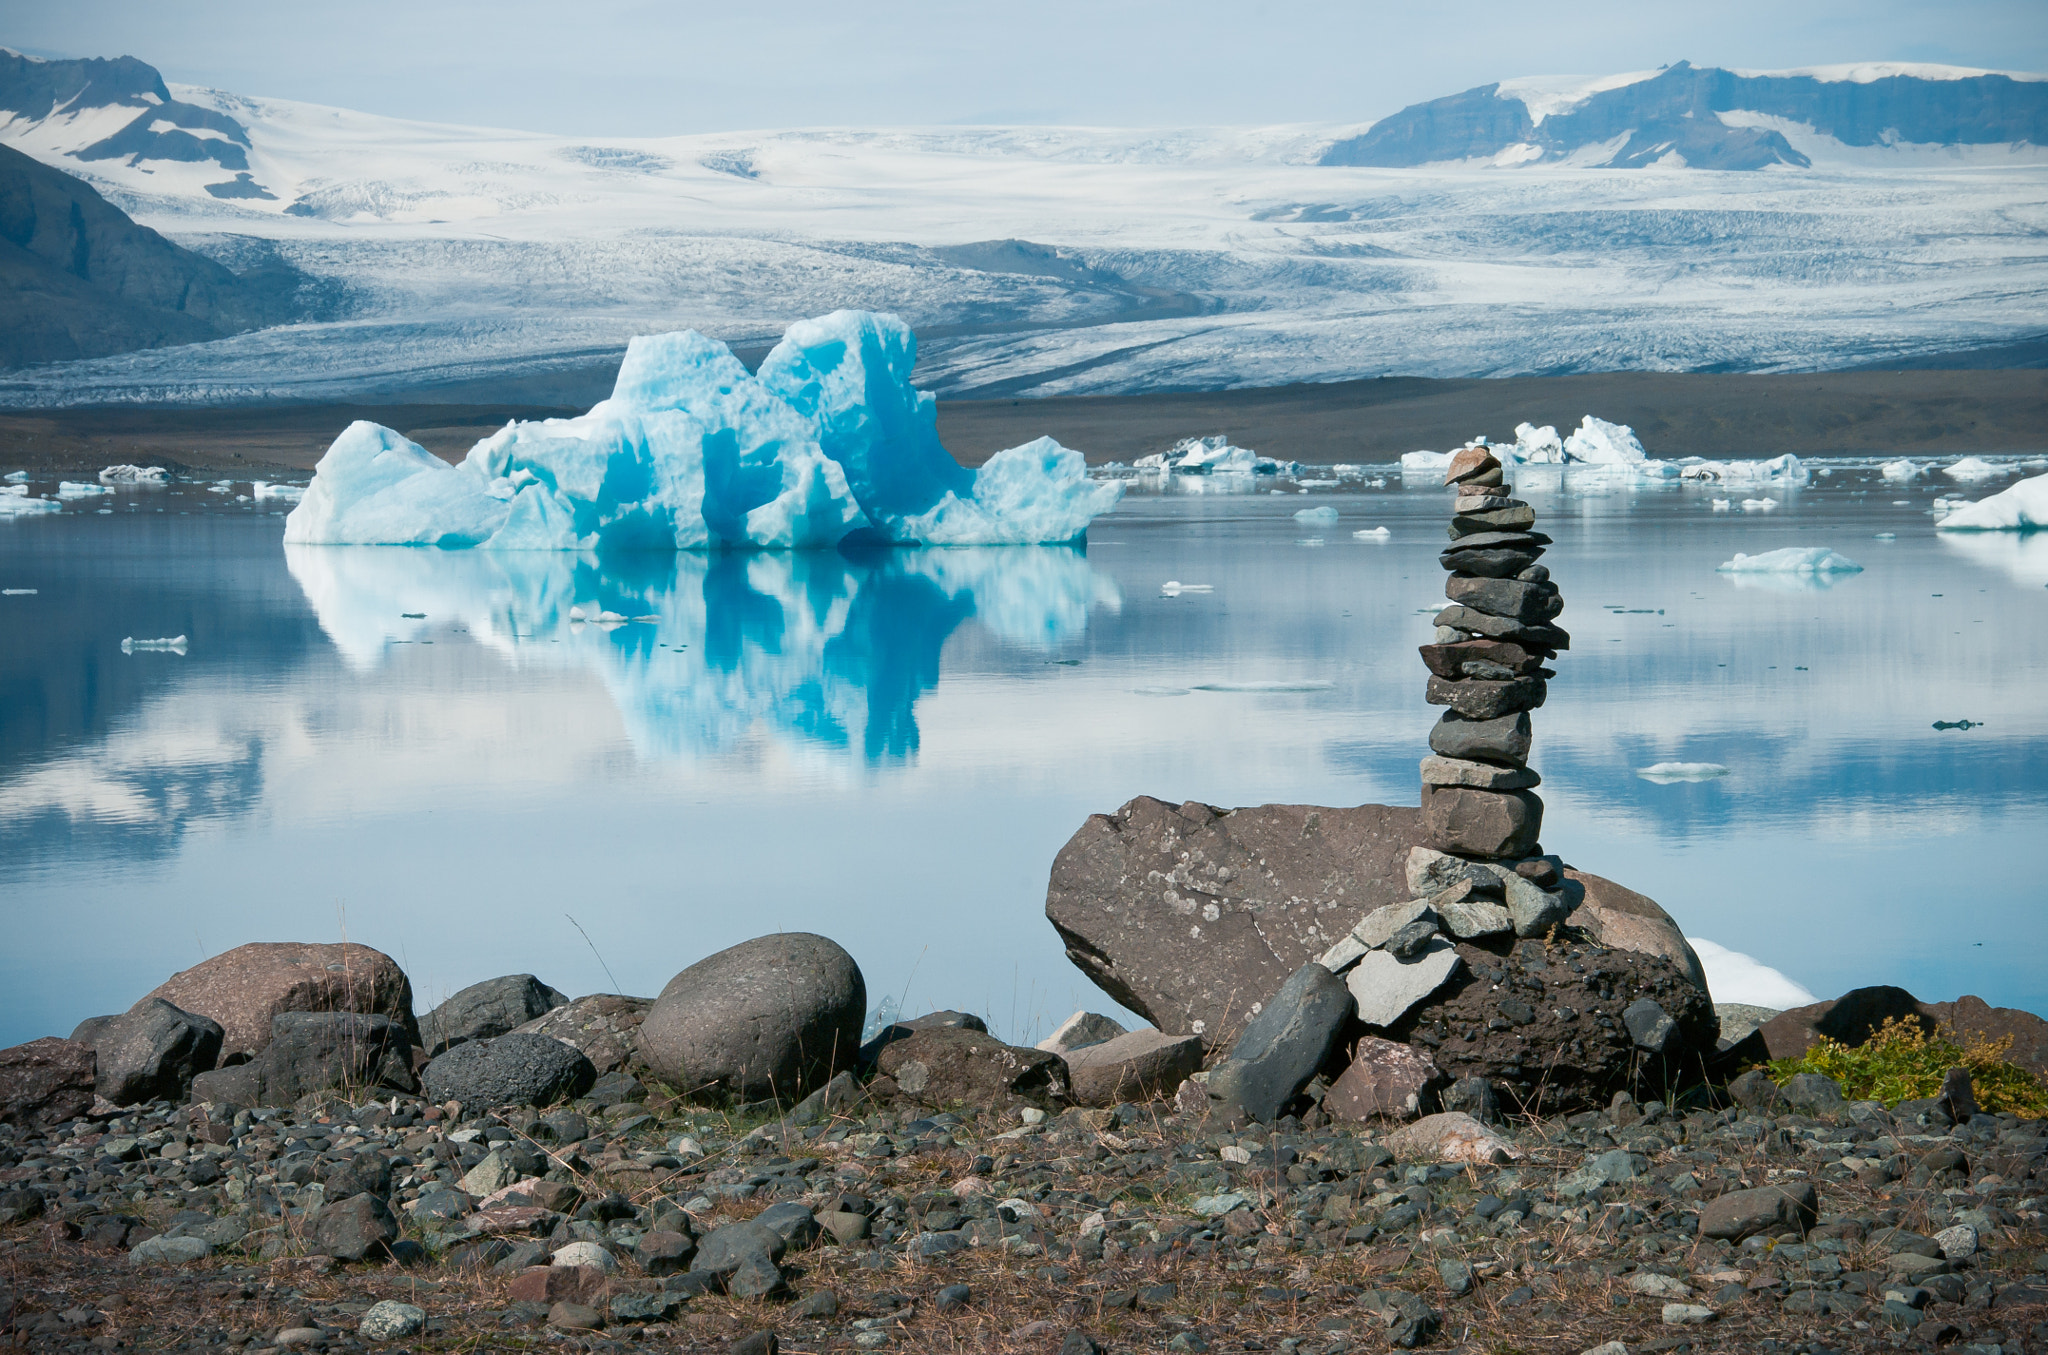 Pentax smc DA 18-250mm F3.5-6.3 sample photo. Rock cairn in front of blue iceberg and glacier photography